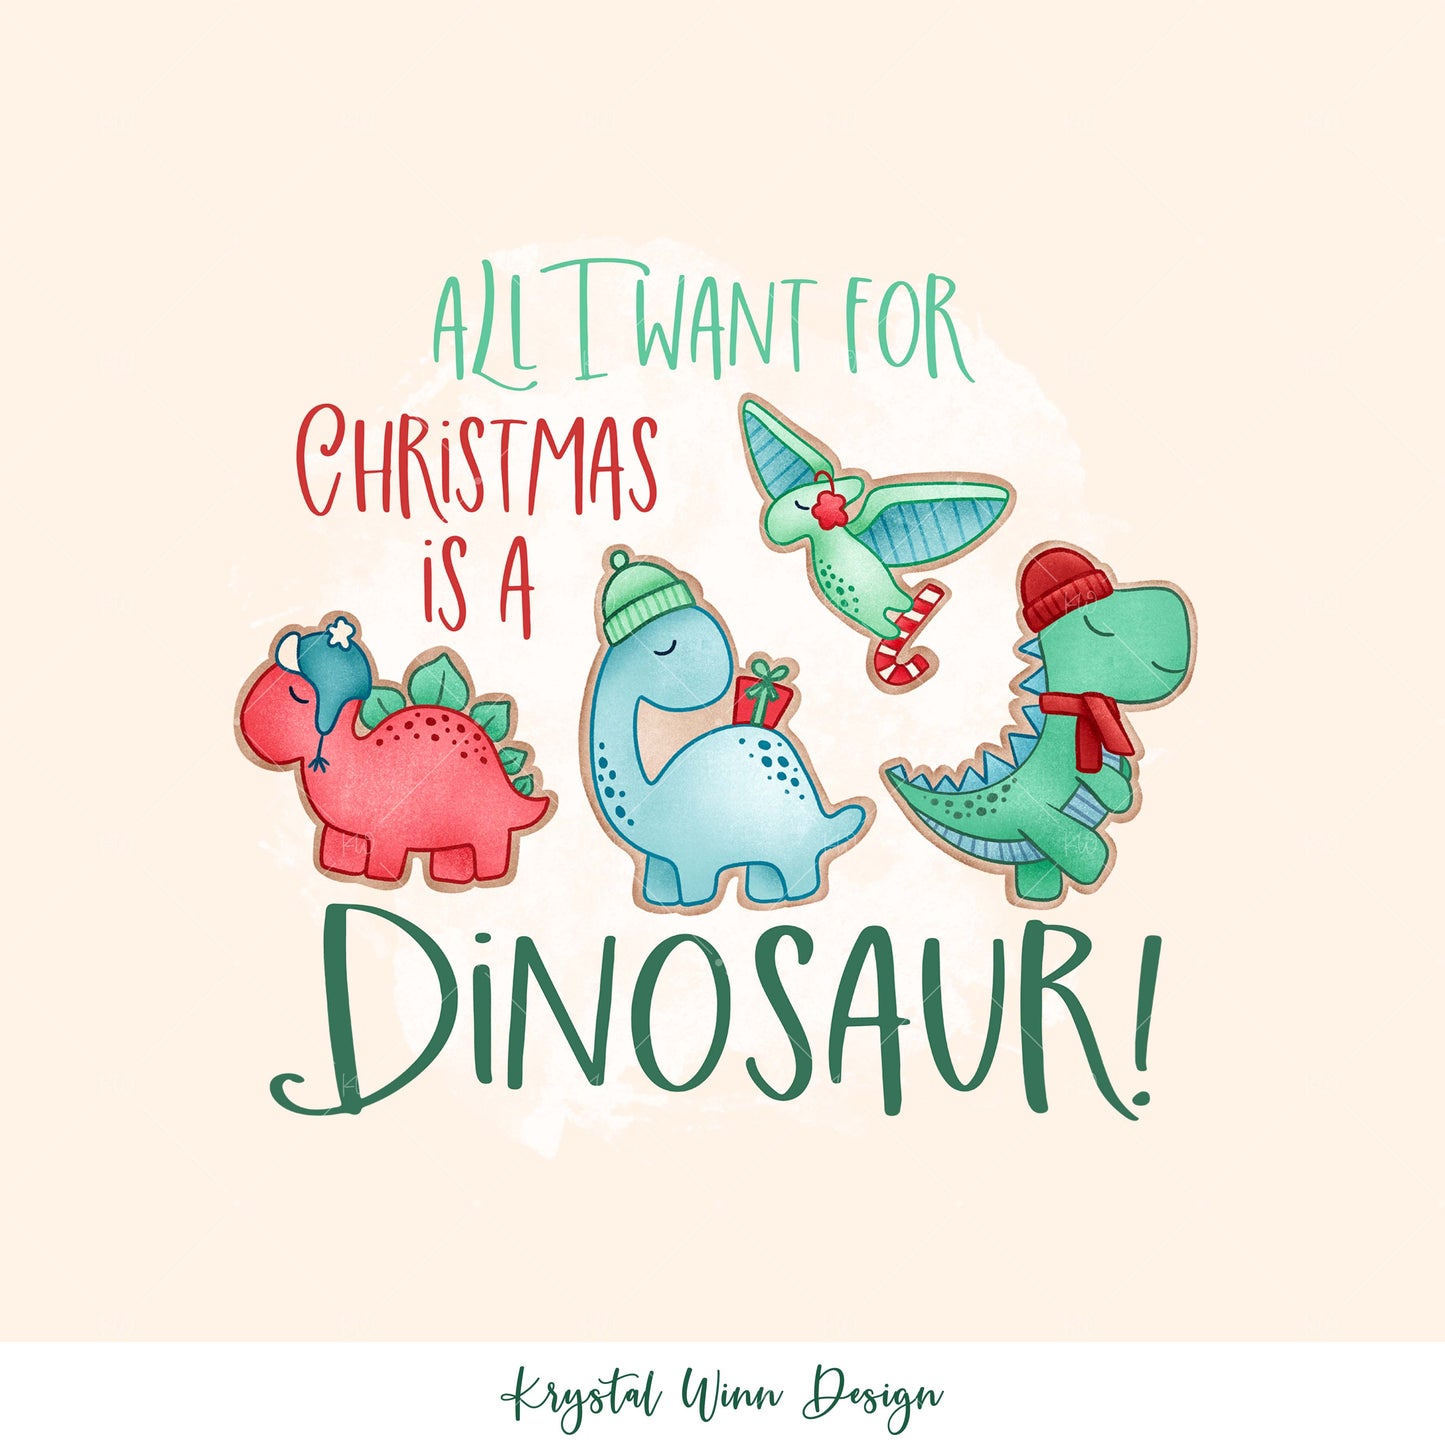 All I want For Christmas Dinosaurs KW266